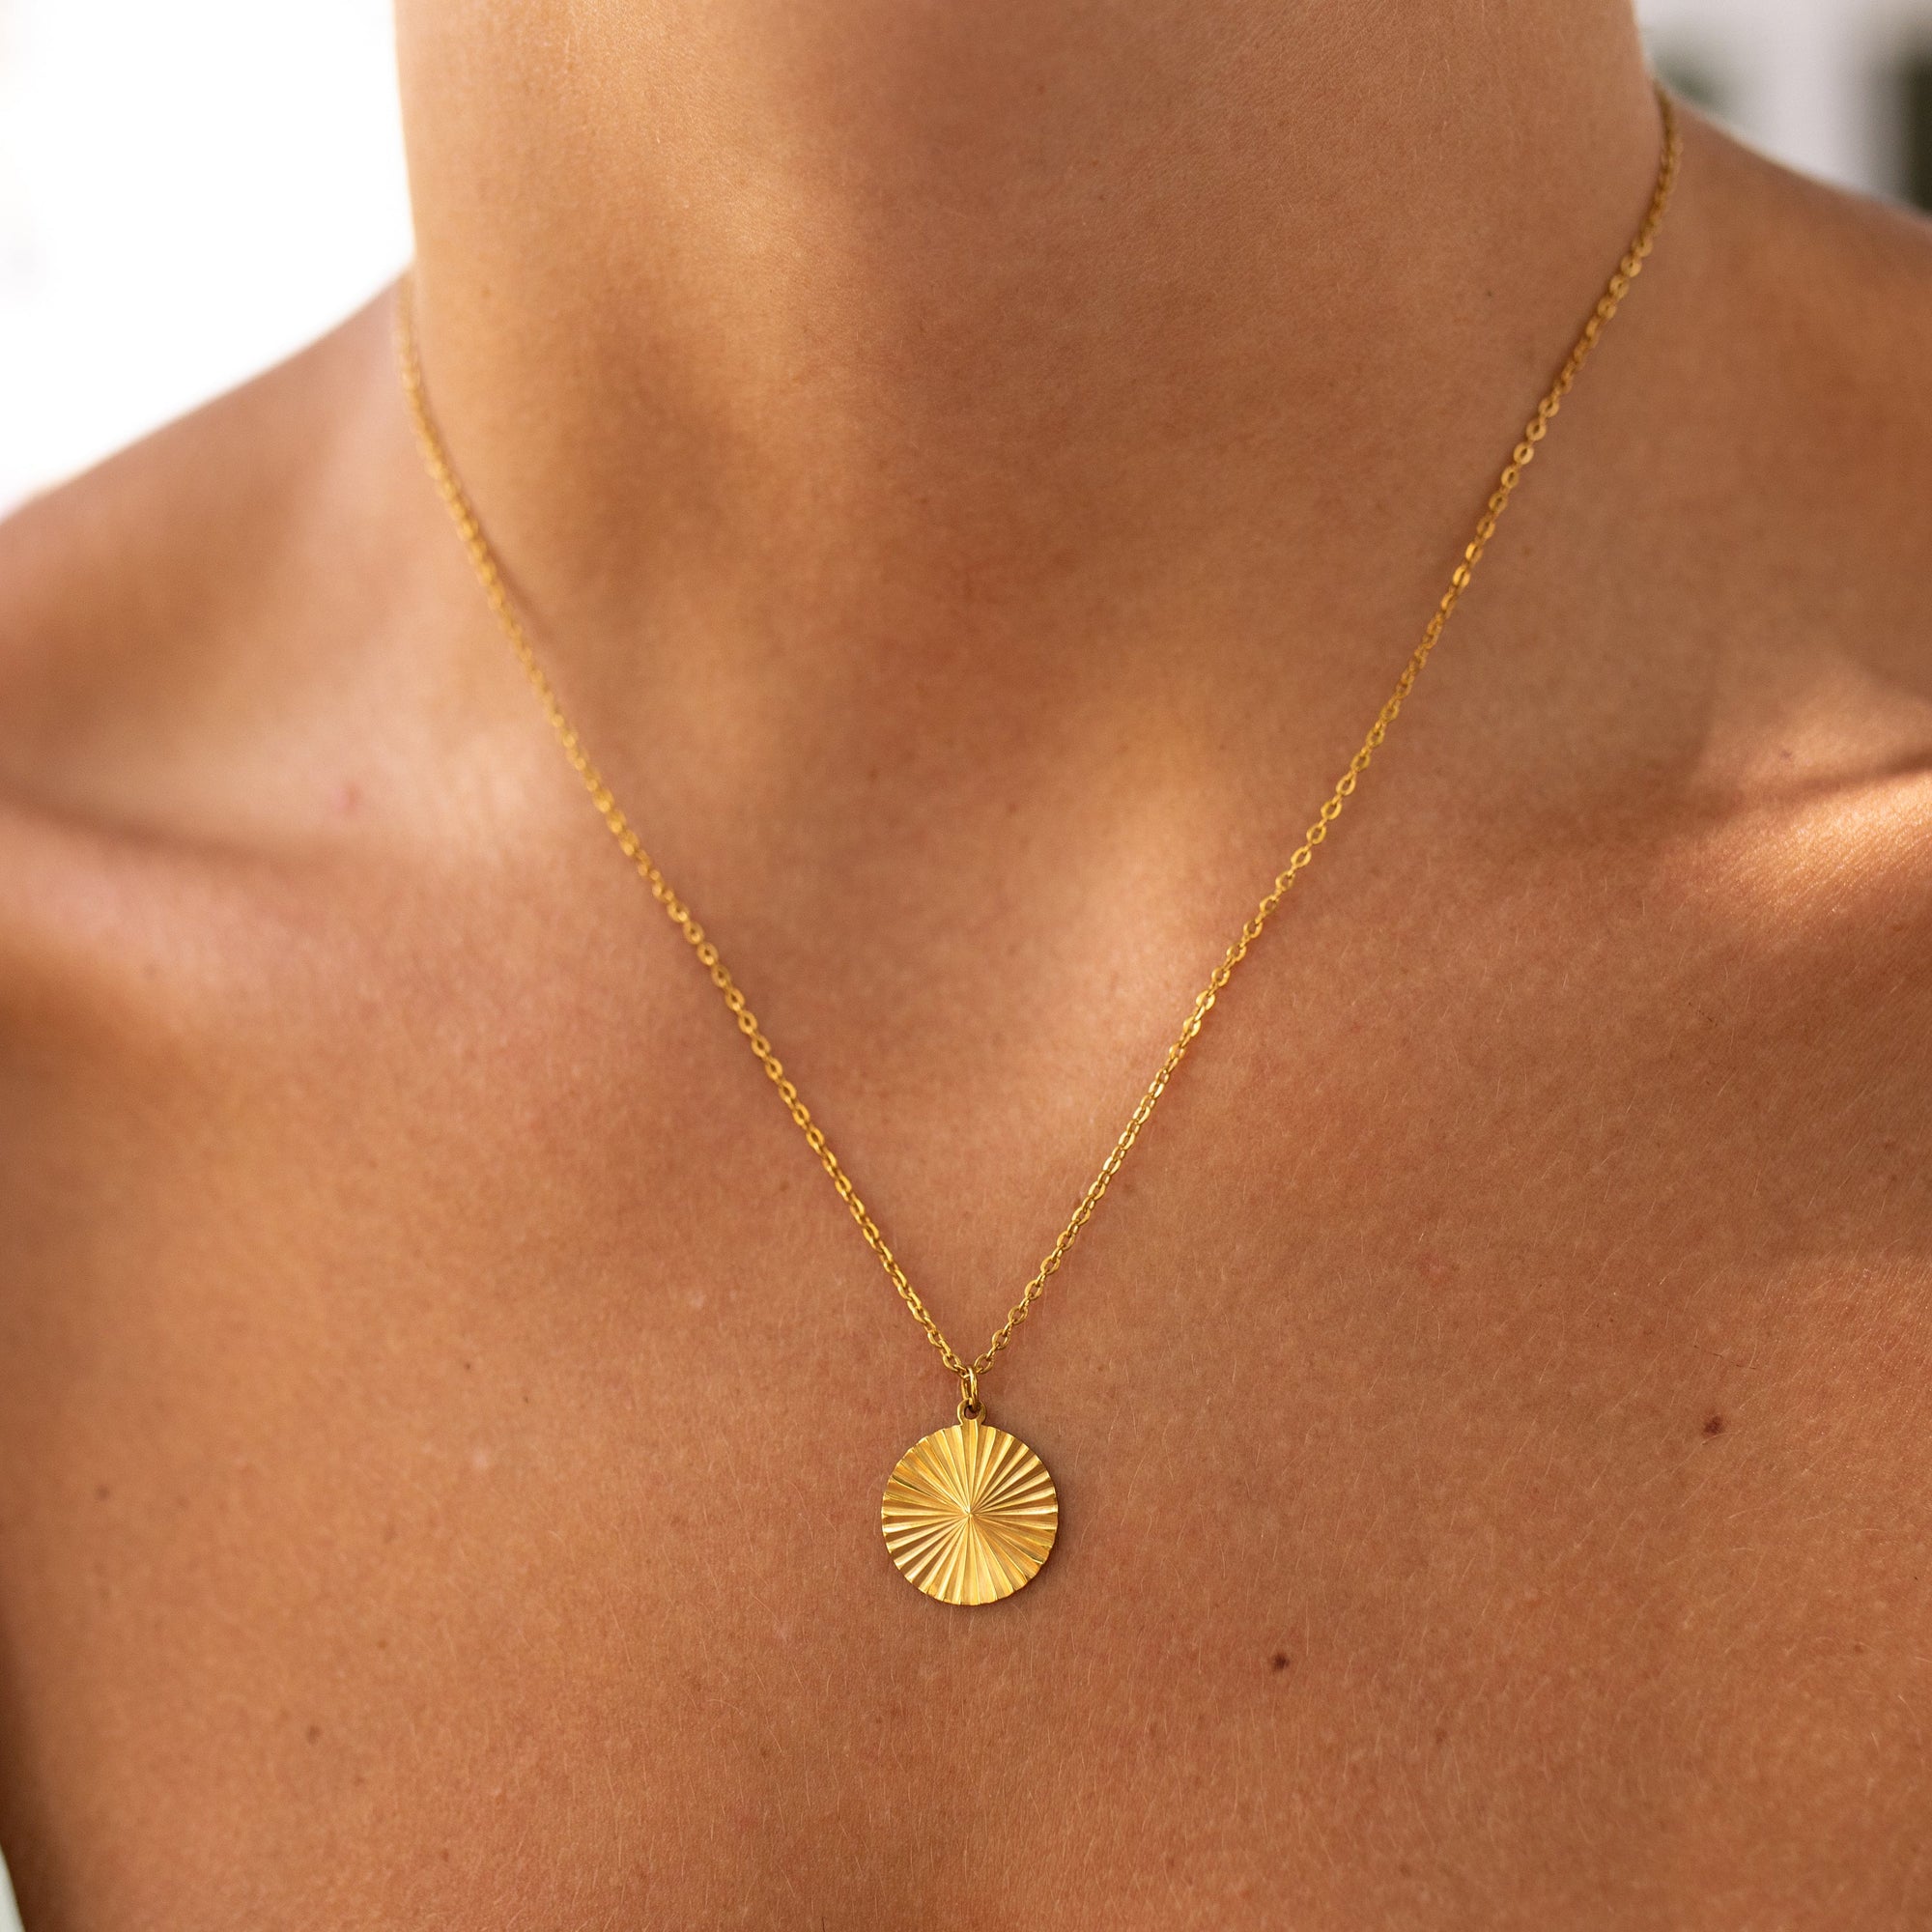 Chasing Sunset Necklace 18", Gold | ALCO Jewelry